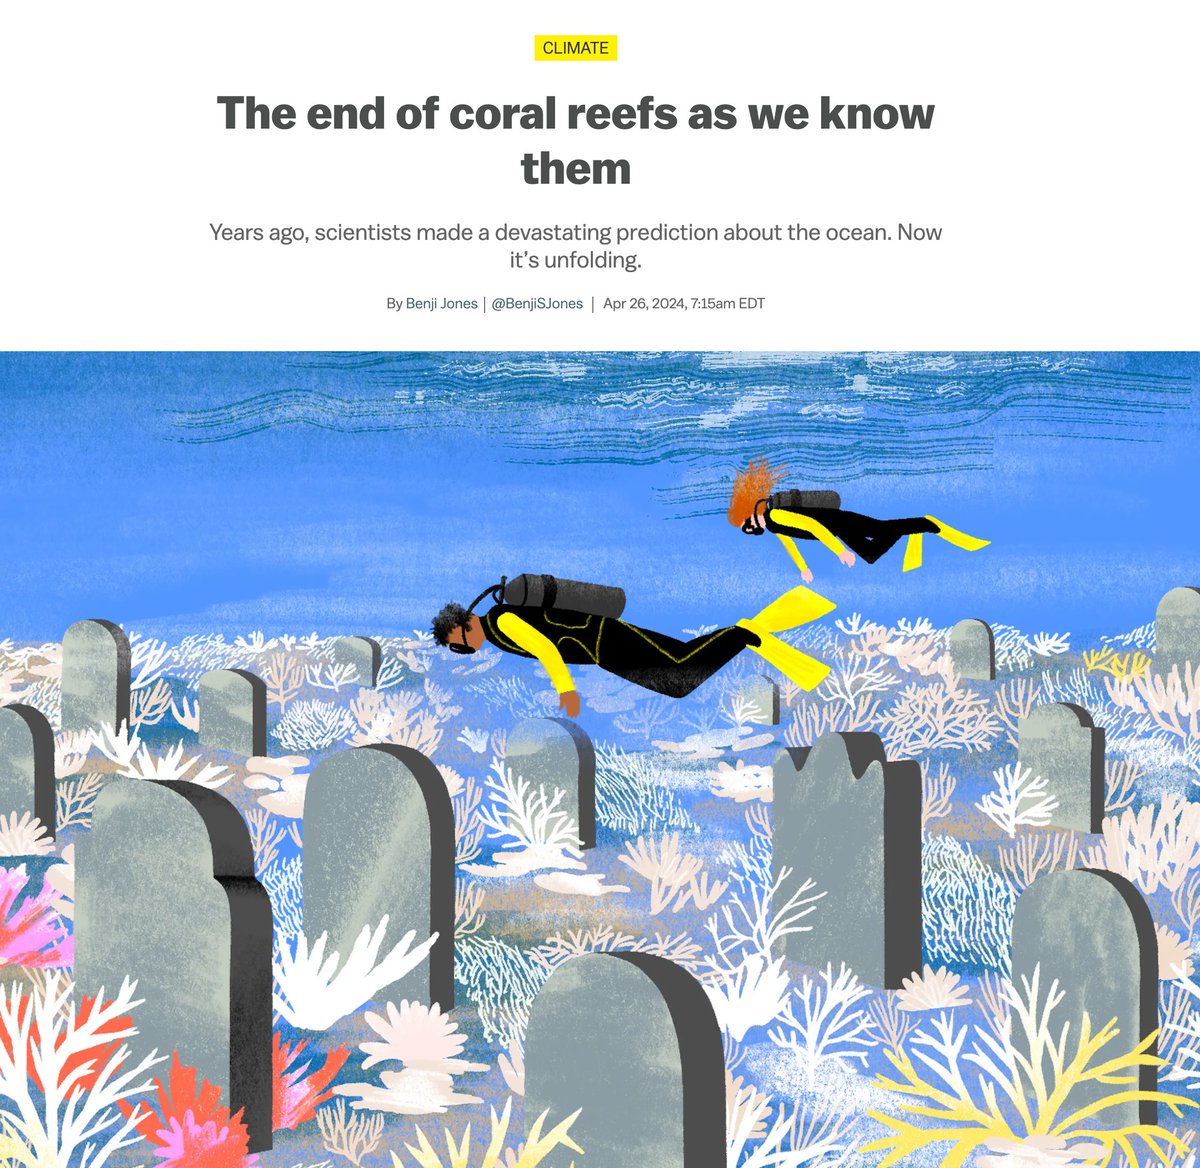 Coral reefs are, indeed, collapsing. Climate change doesn’t just deal a temporary blow to these animals — it will bring about the end of reefs as we know them. The latest from @BenjiSJones for @voxdotcom: vox.com/climate/241372…